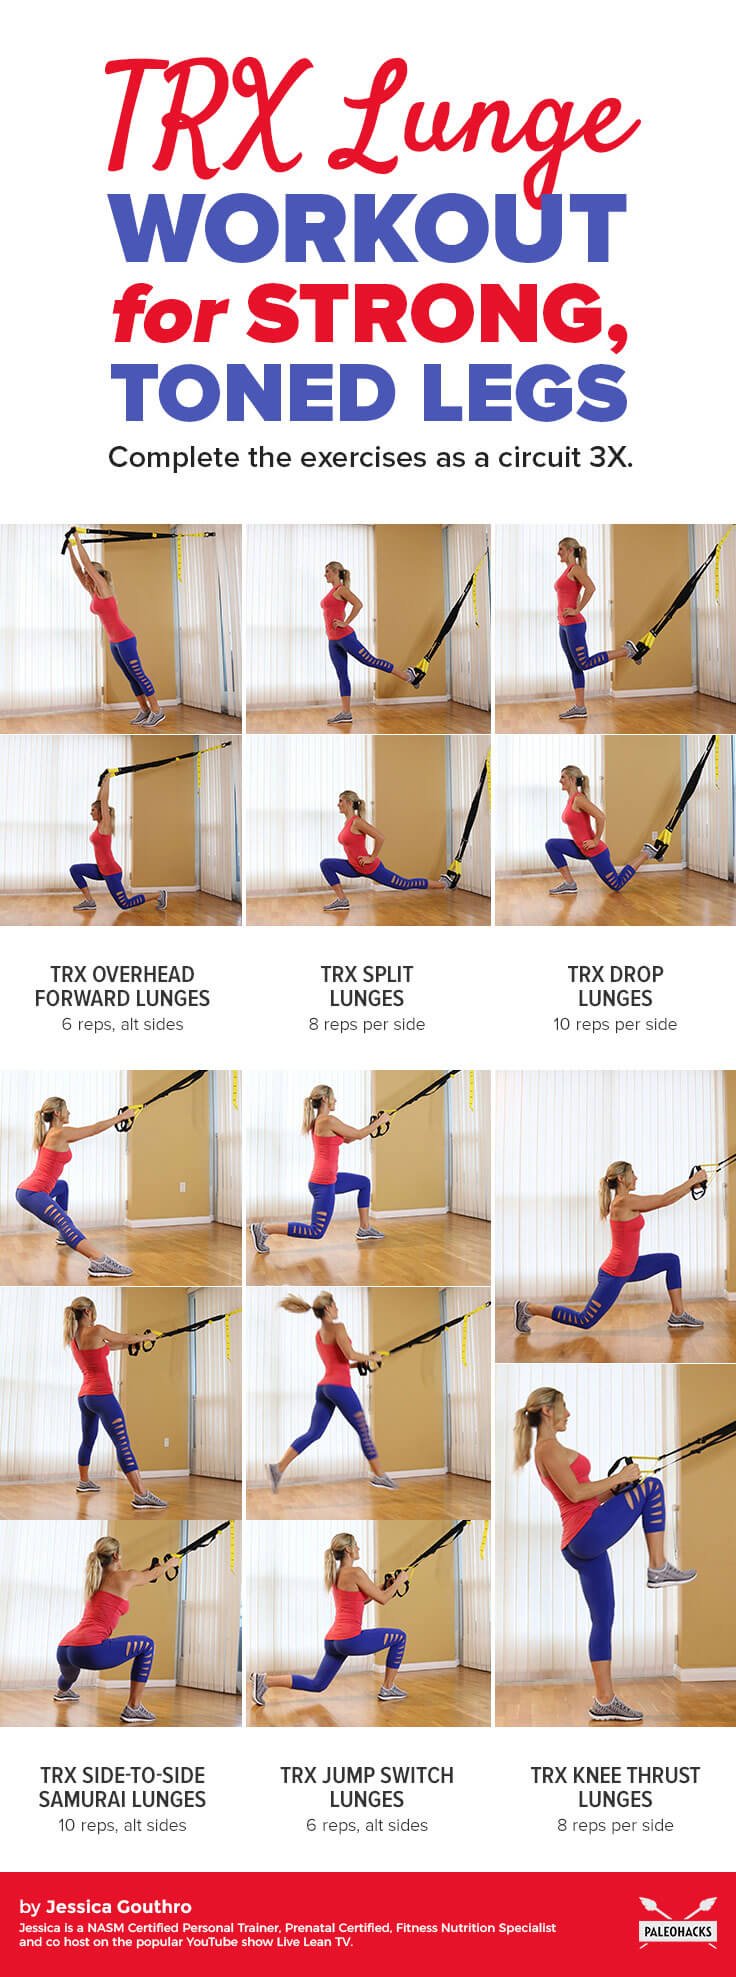 trx lunge workout infographic